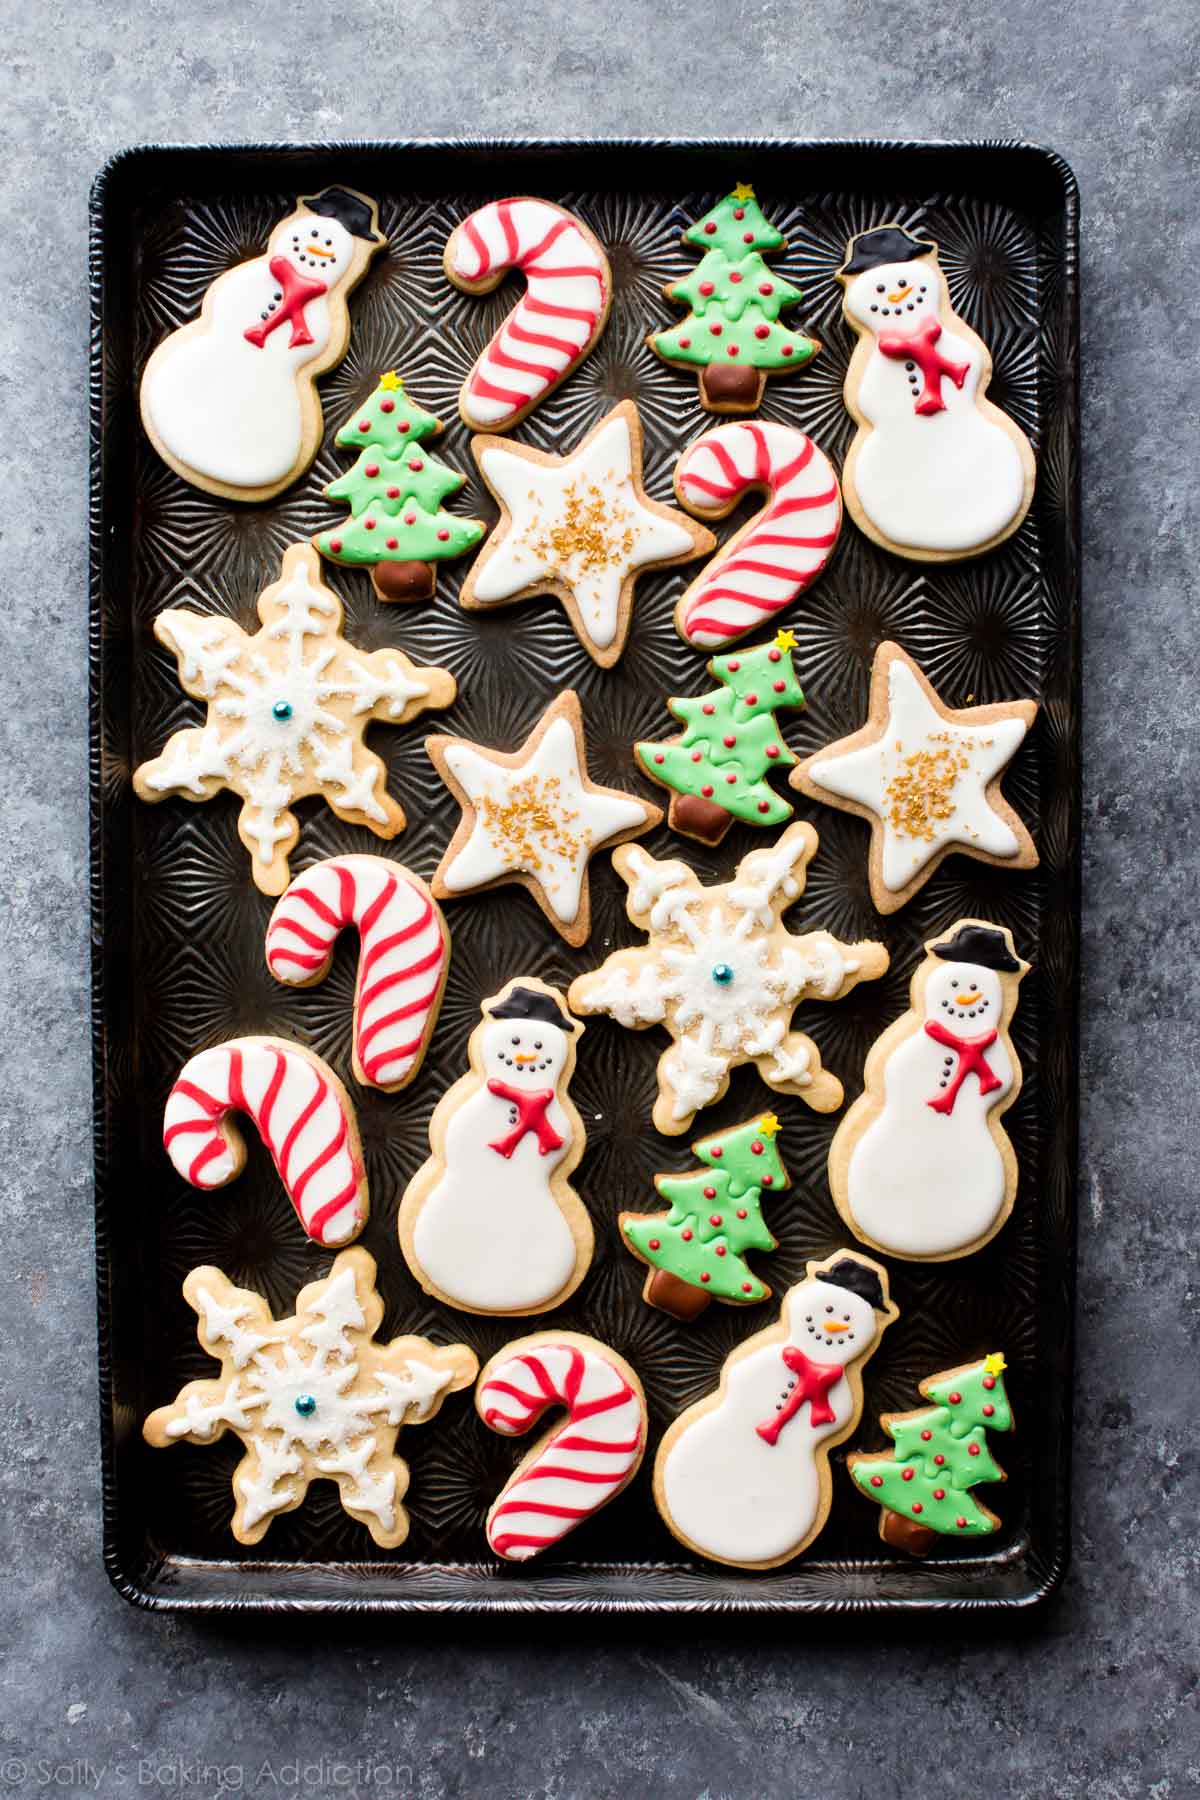 How to Decorate Sugar Cookies - Sally's Baking Addiction